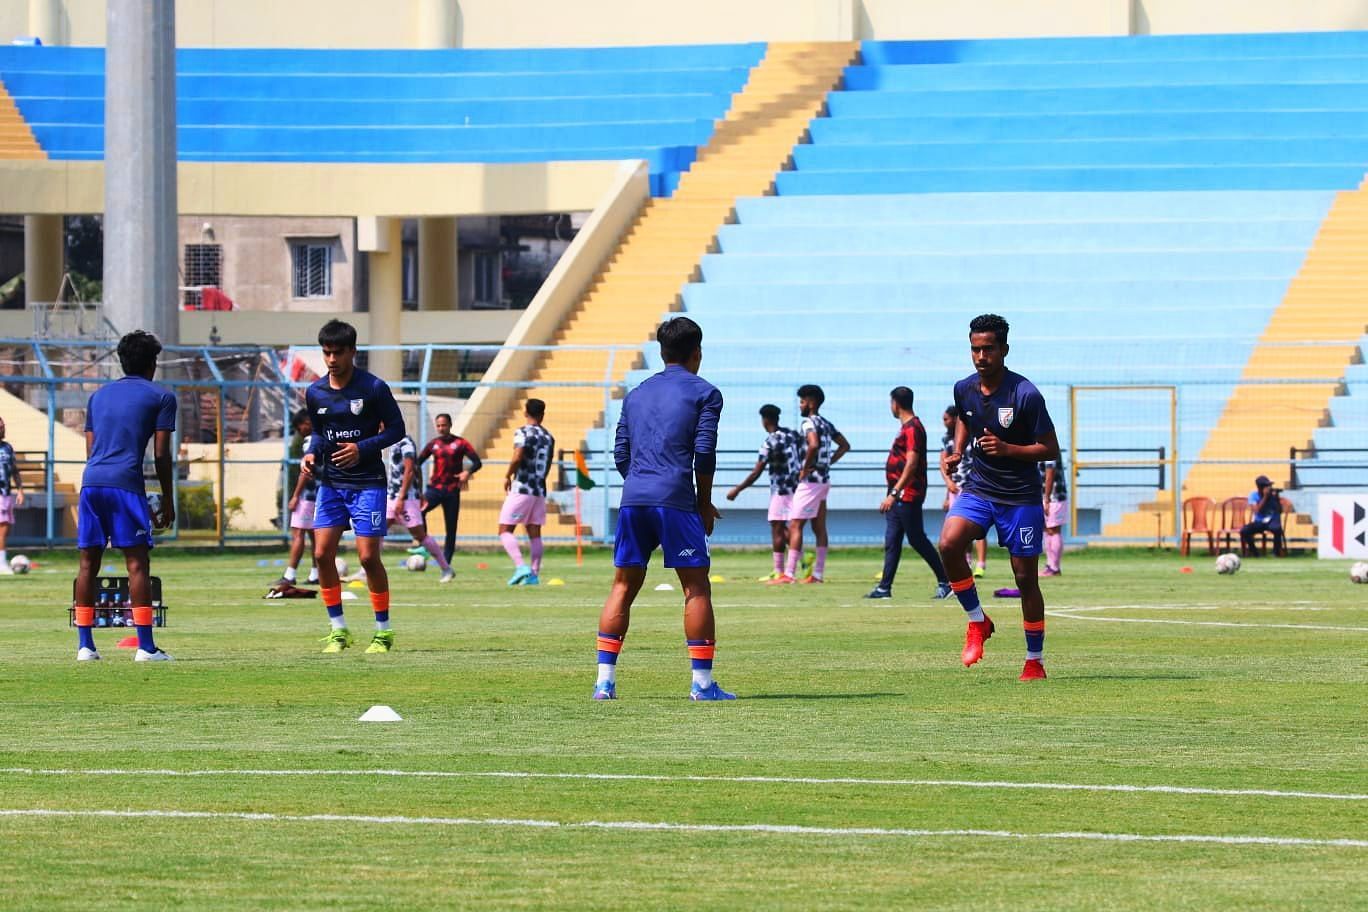 Indian Arrows players training ahead of their I-League clash. (Image Courtesy: Twitter/Indian_Arrows)